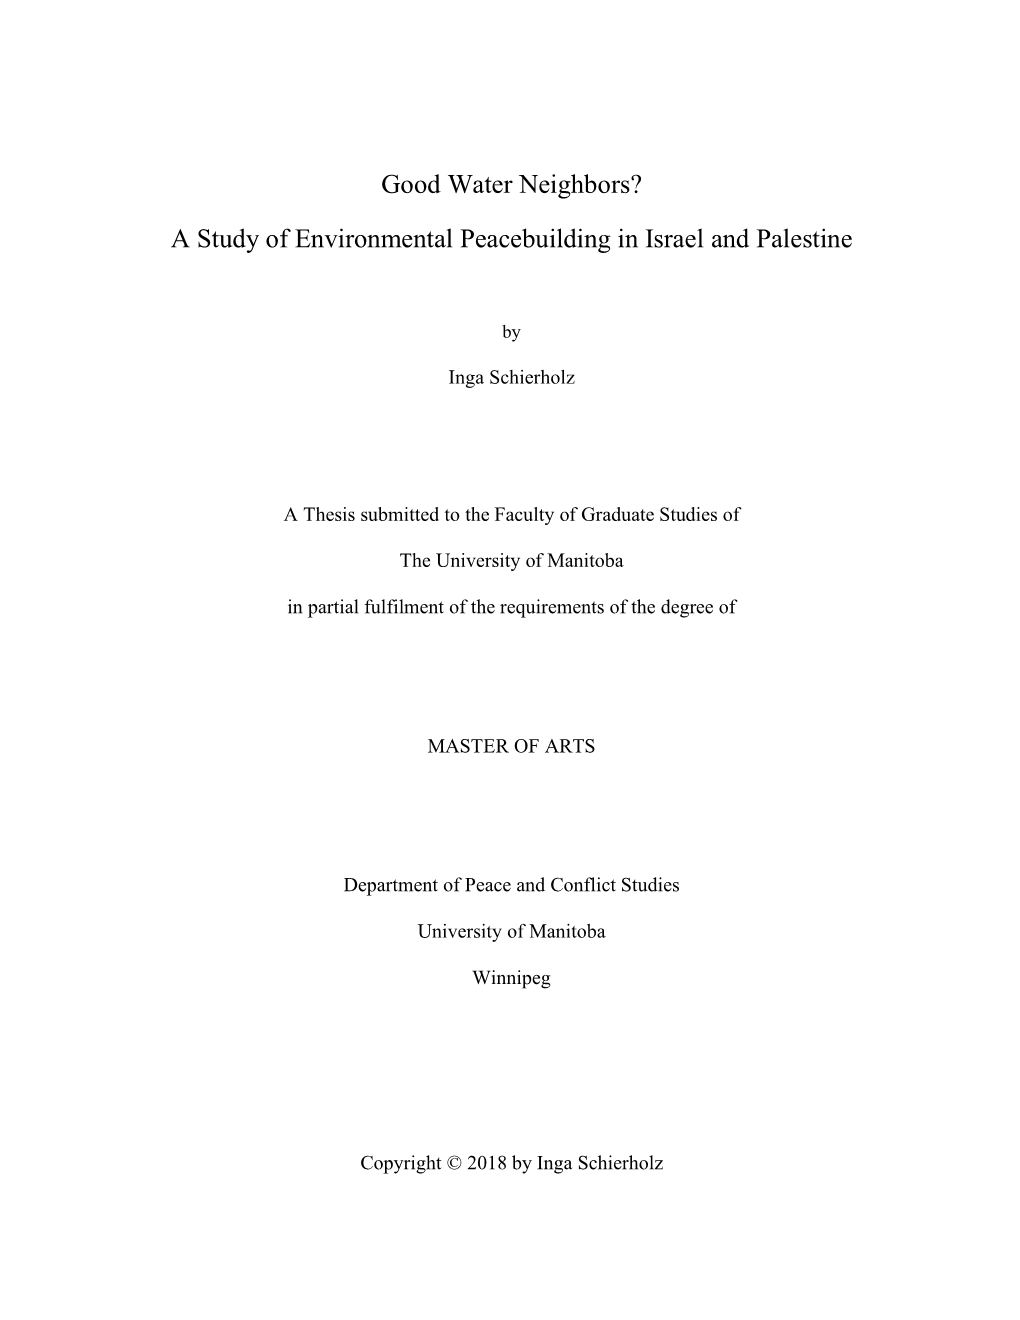 A Study of Environmental Peacebuilding in Israel and Palestine